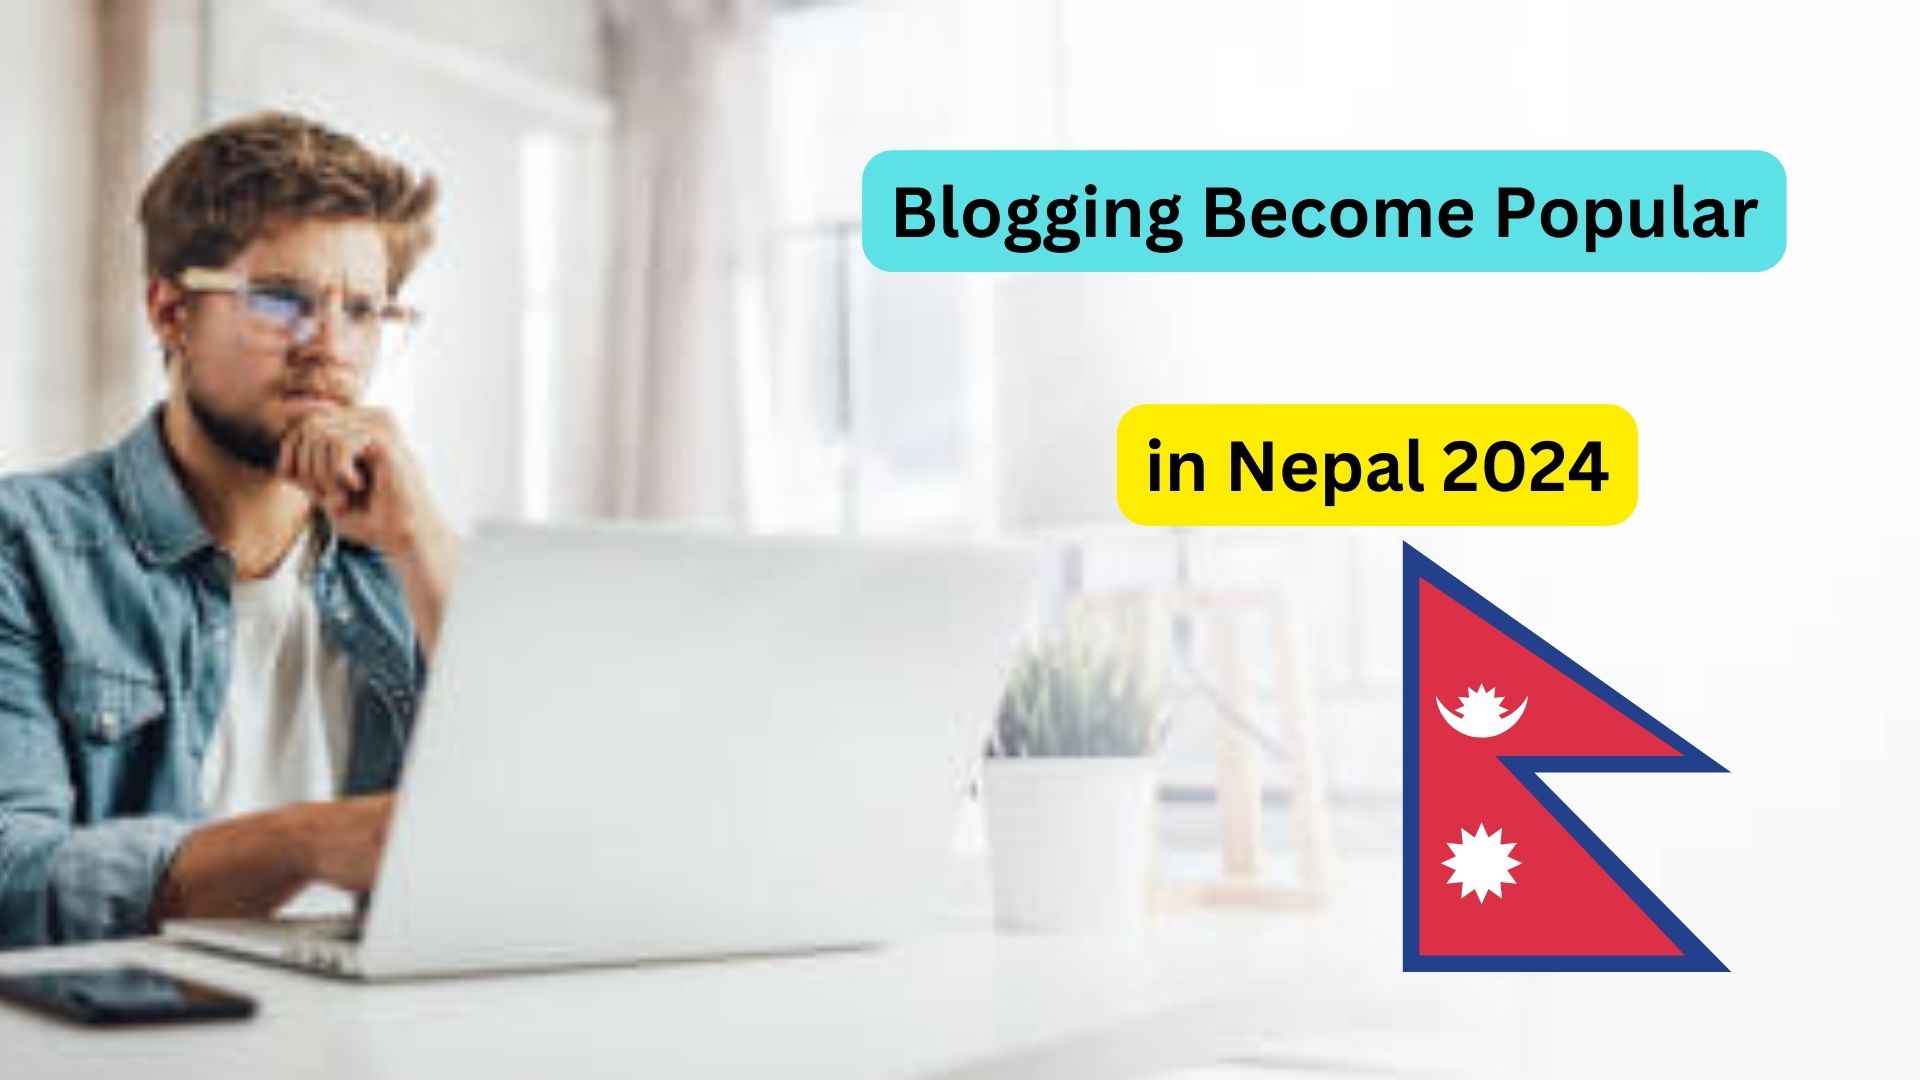 How Did Blogging Become Popular in Nepal 2024